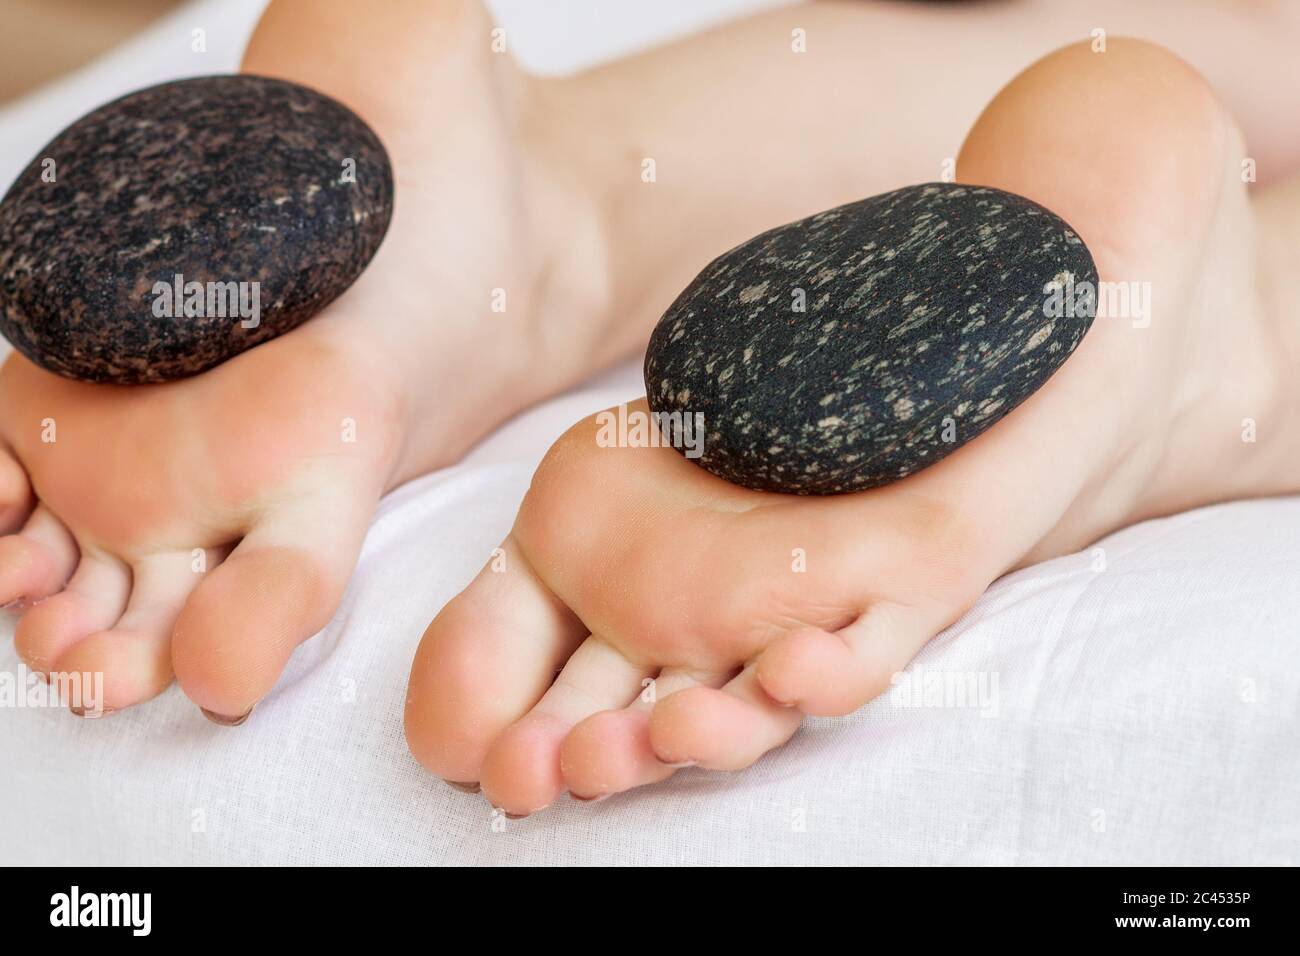 Large new oval black hot stones for back massage lying on female feet in spa  salon Stock Photo - Alamy